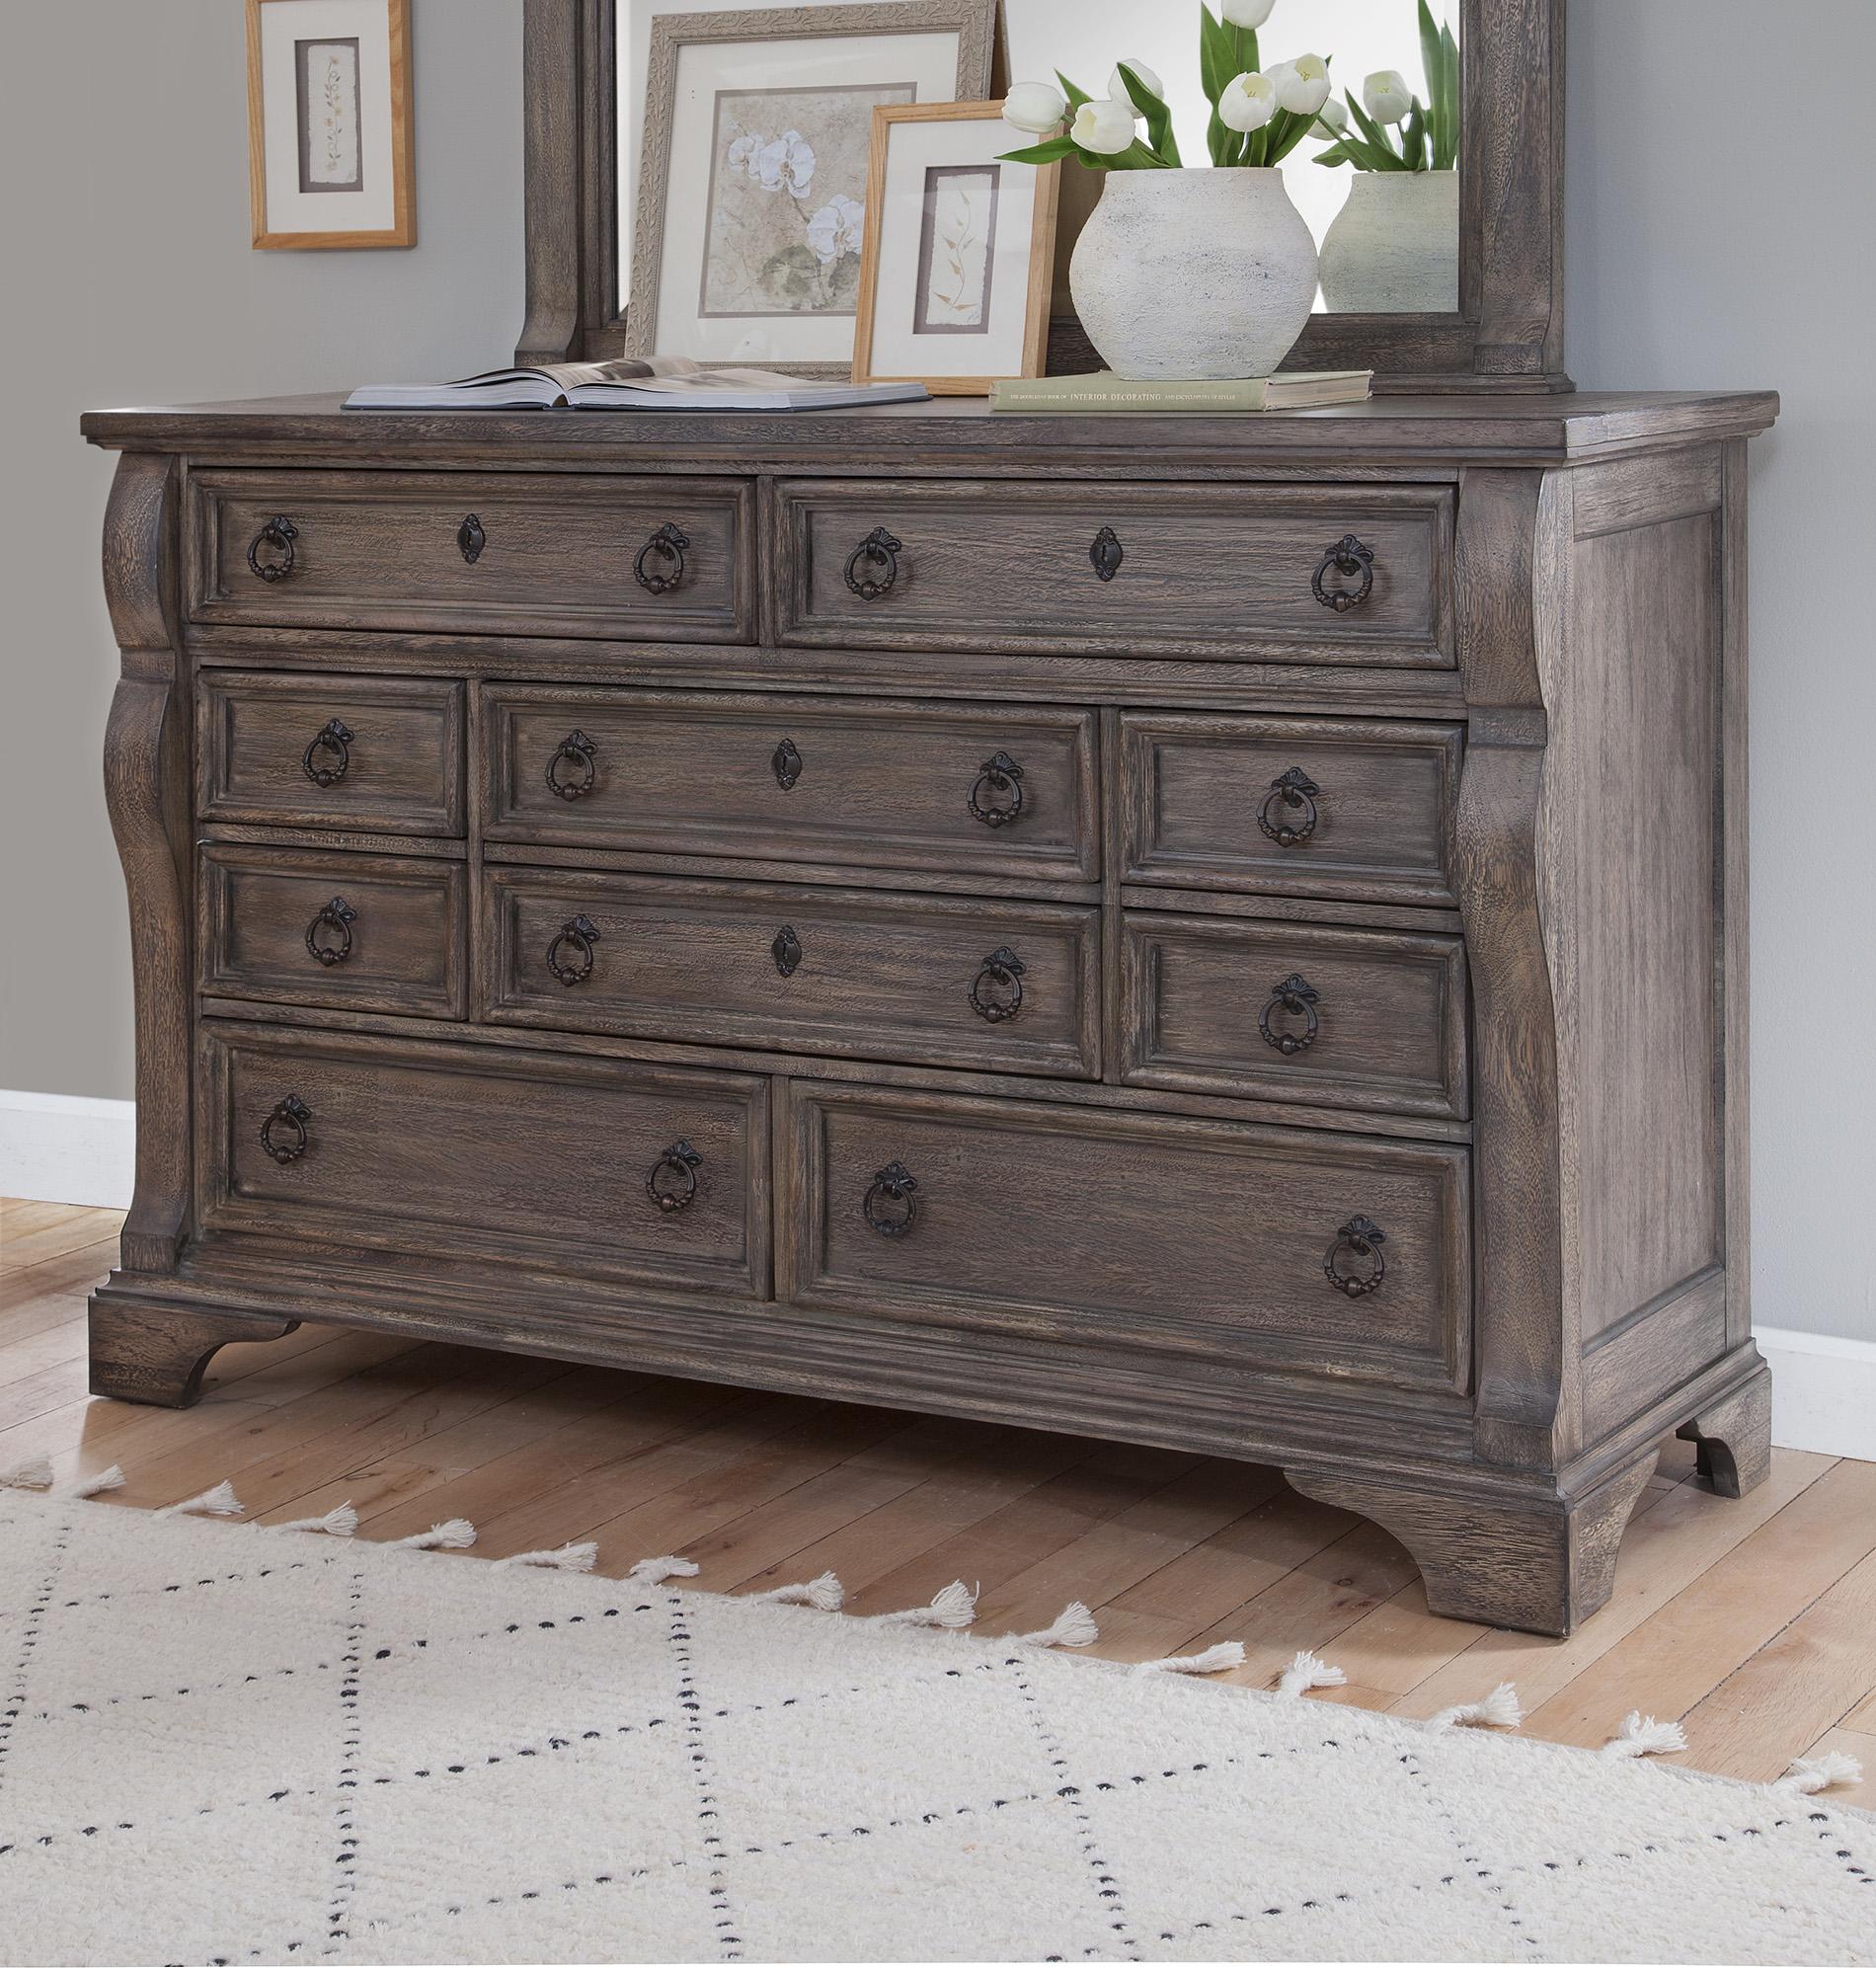 Classic, Traditional, Cottage Dresser HEIRLOOM 2975-210 2975-210 in Charcoal 